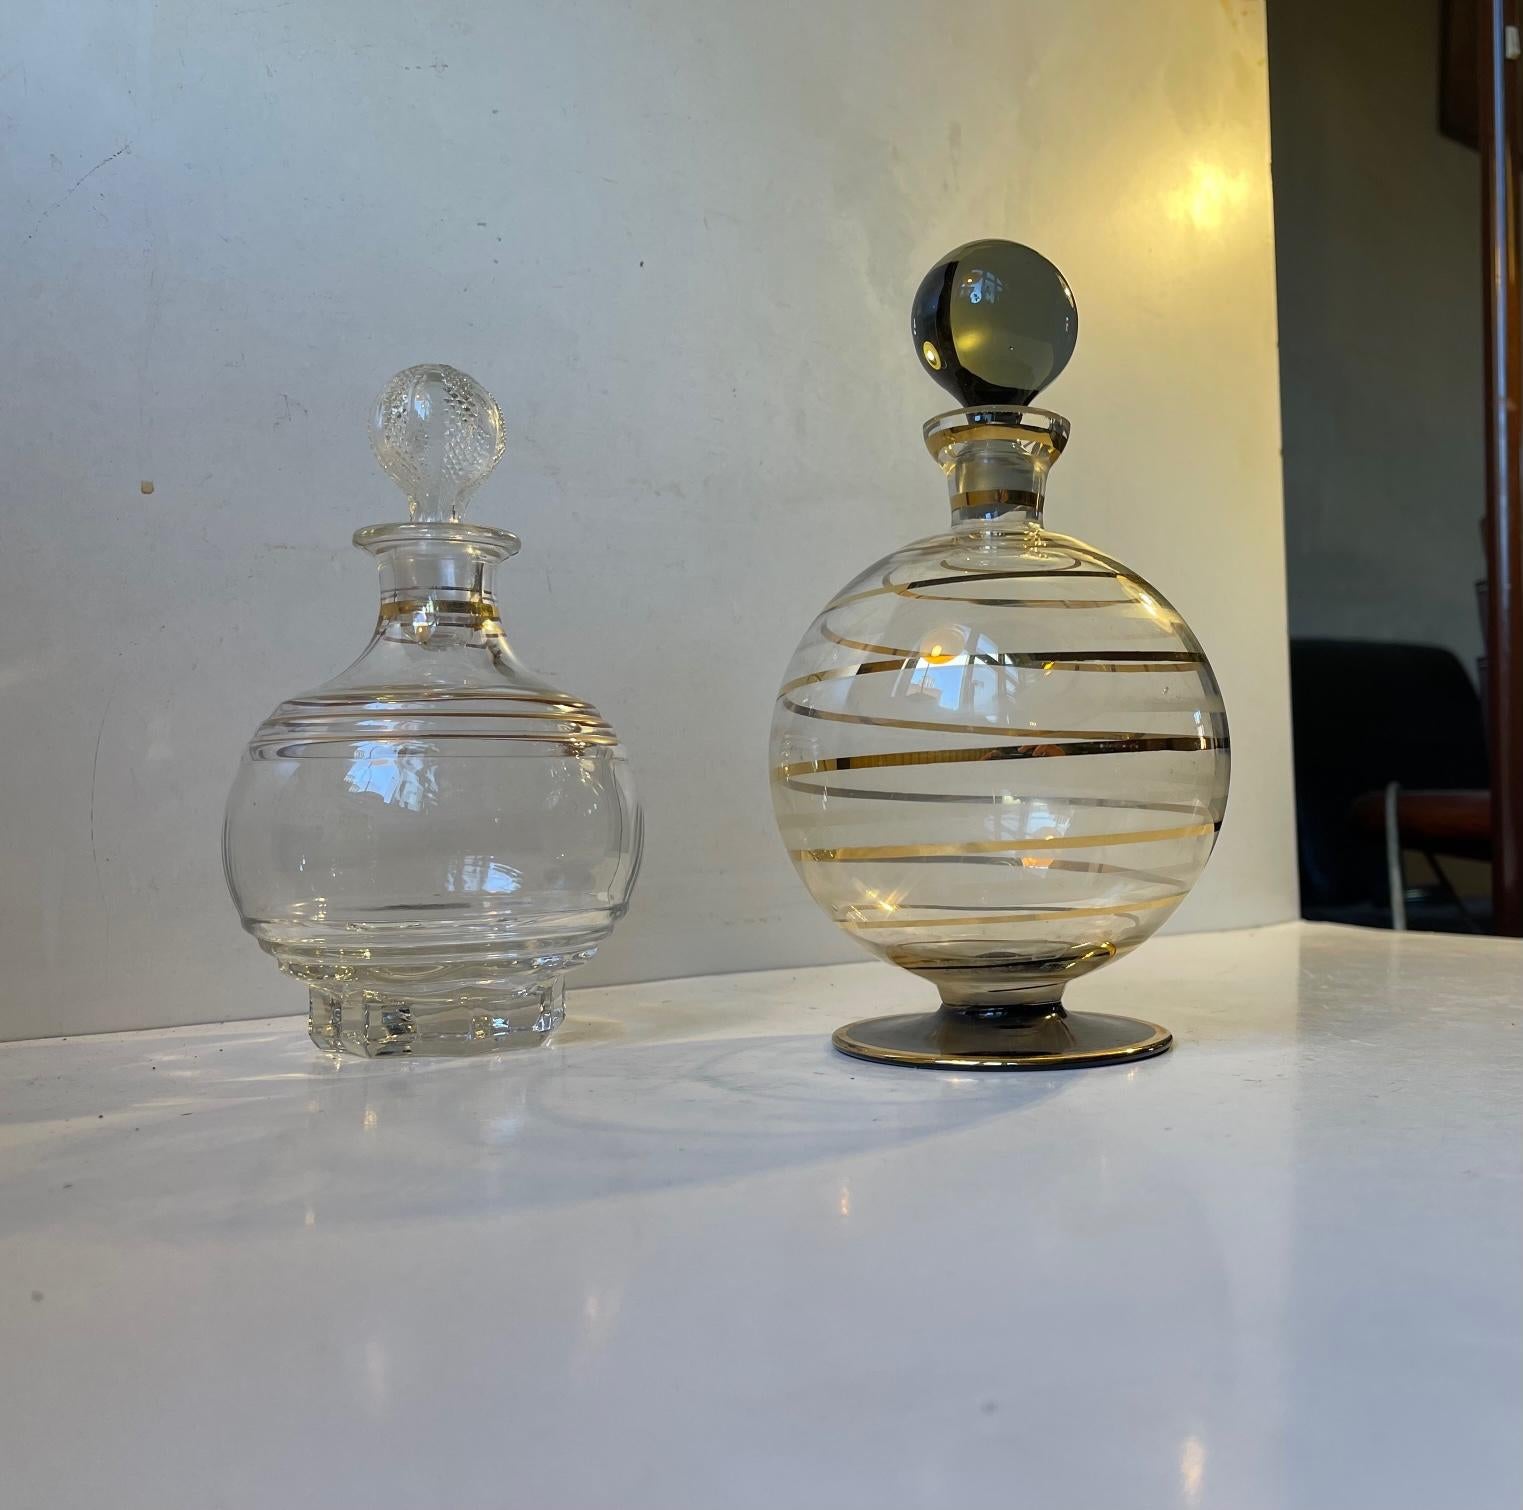 A set of ball-shaped decanter. One hand-blown and decorated with gold glaze and black glass and one in pressed glass with gold stripes. They were both manufactured in Italy between 1950-70s. Measurements: H: 22/19 cm, D: 14/11 cm. Capacity: circa